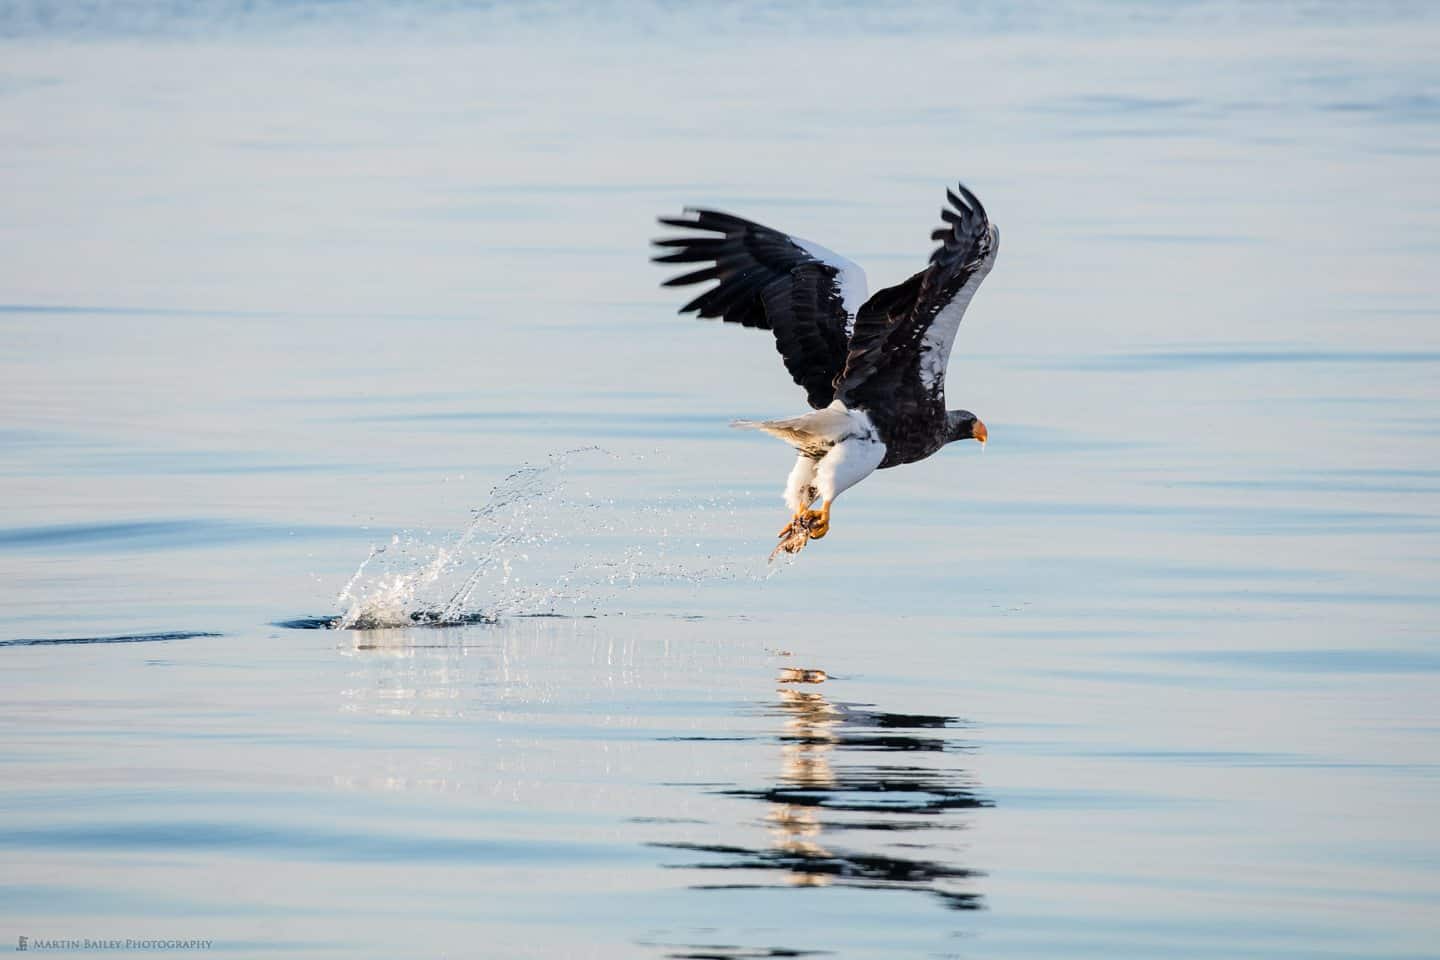 Steller's Sea Eagle Catching Fish from Calm Sea